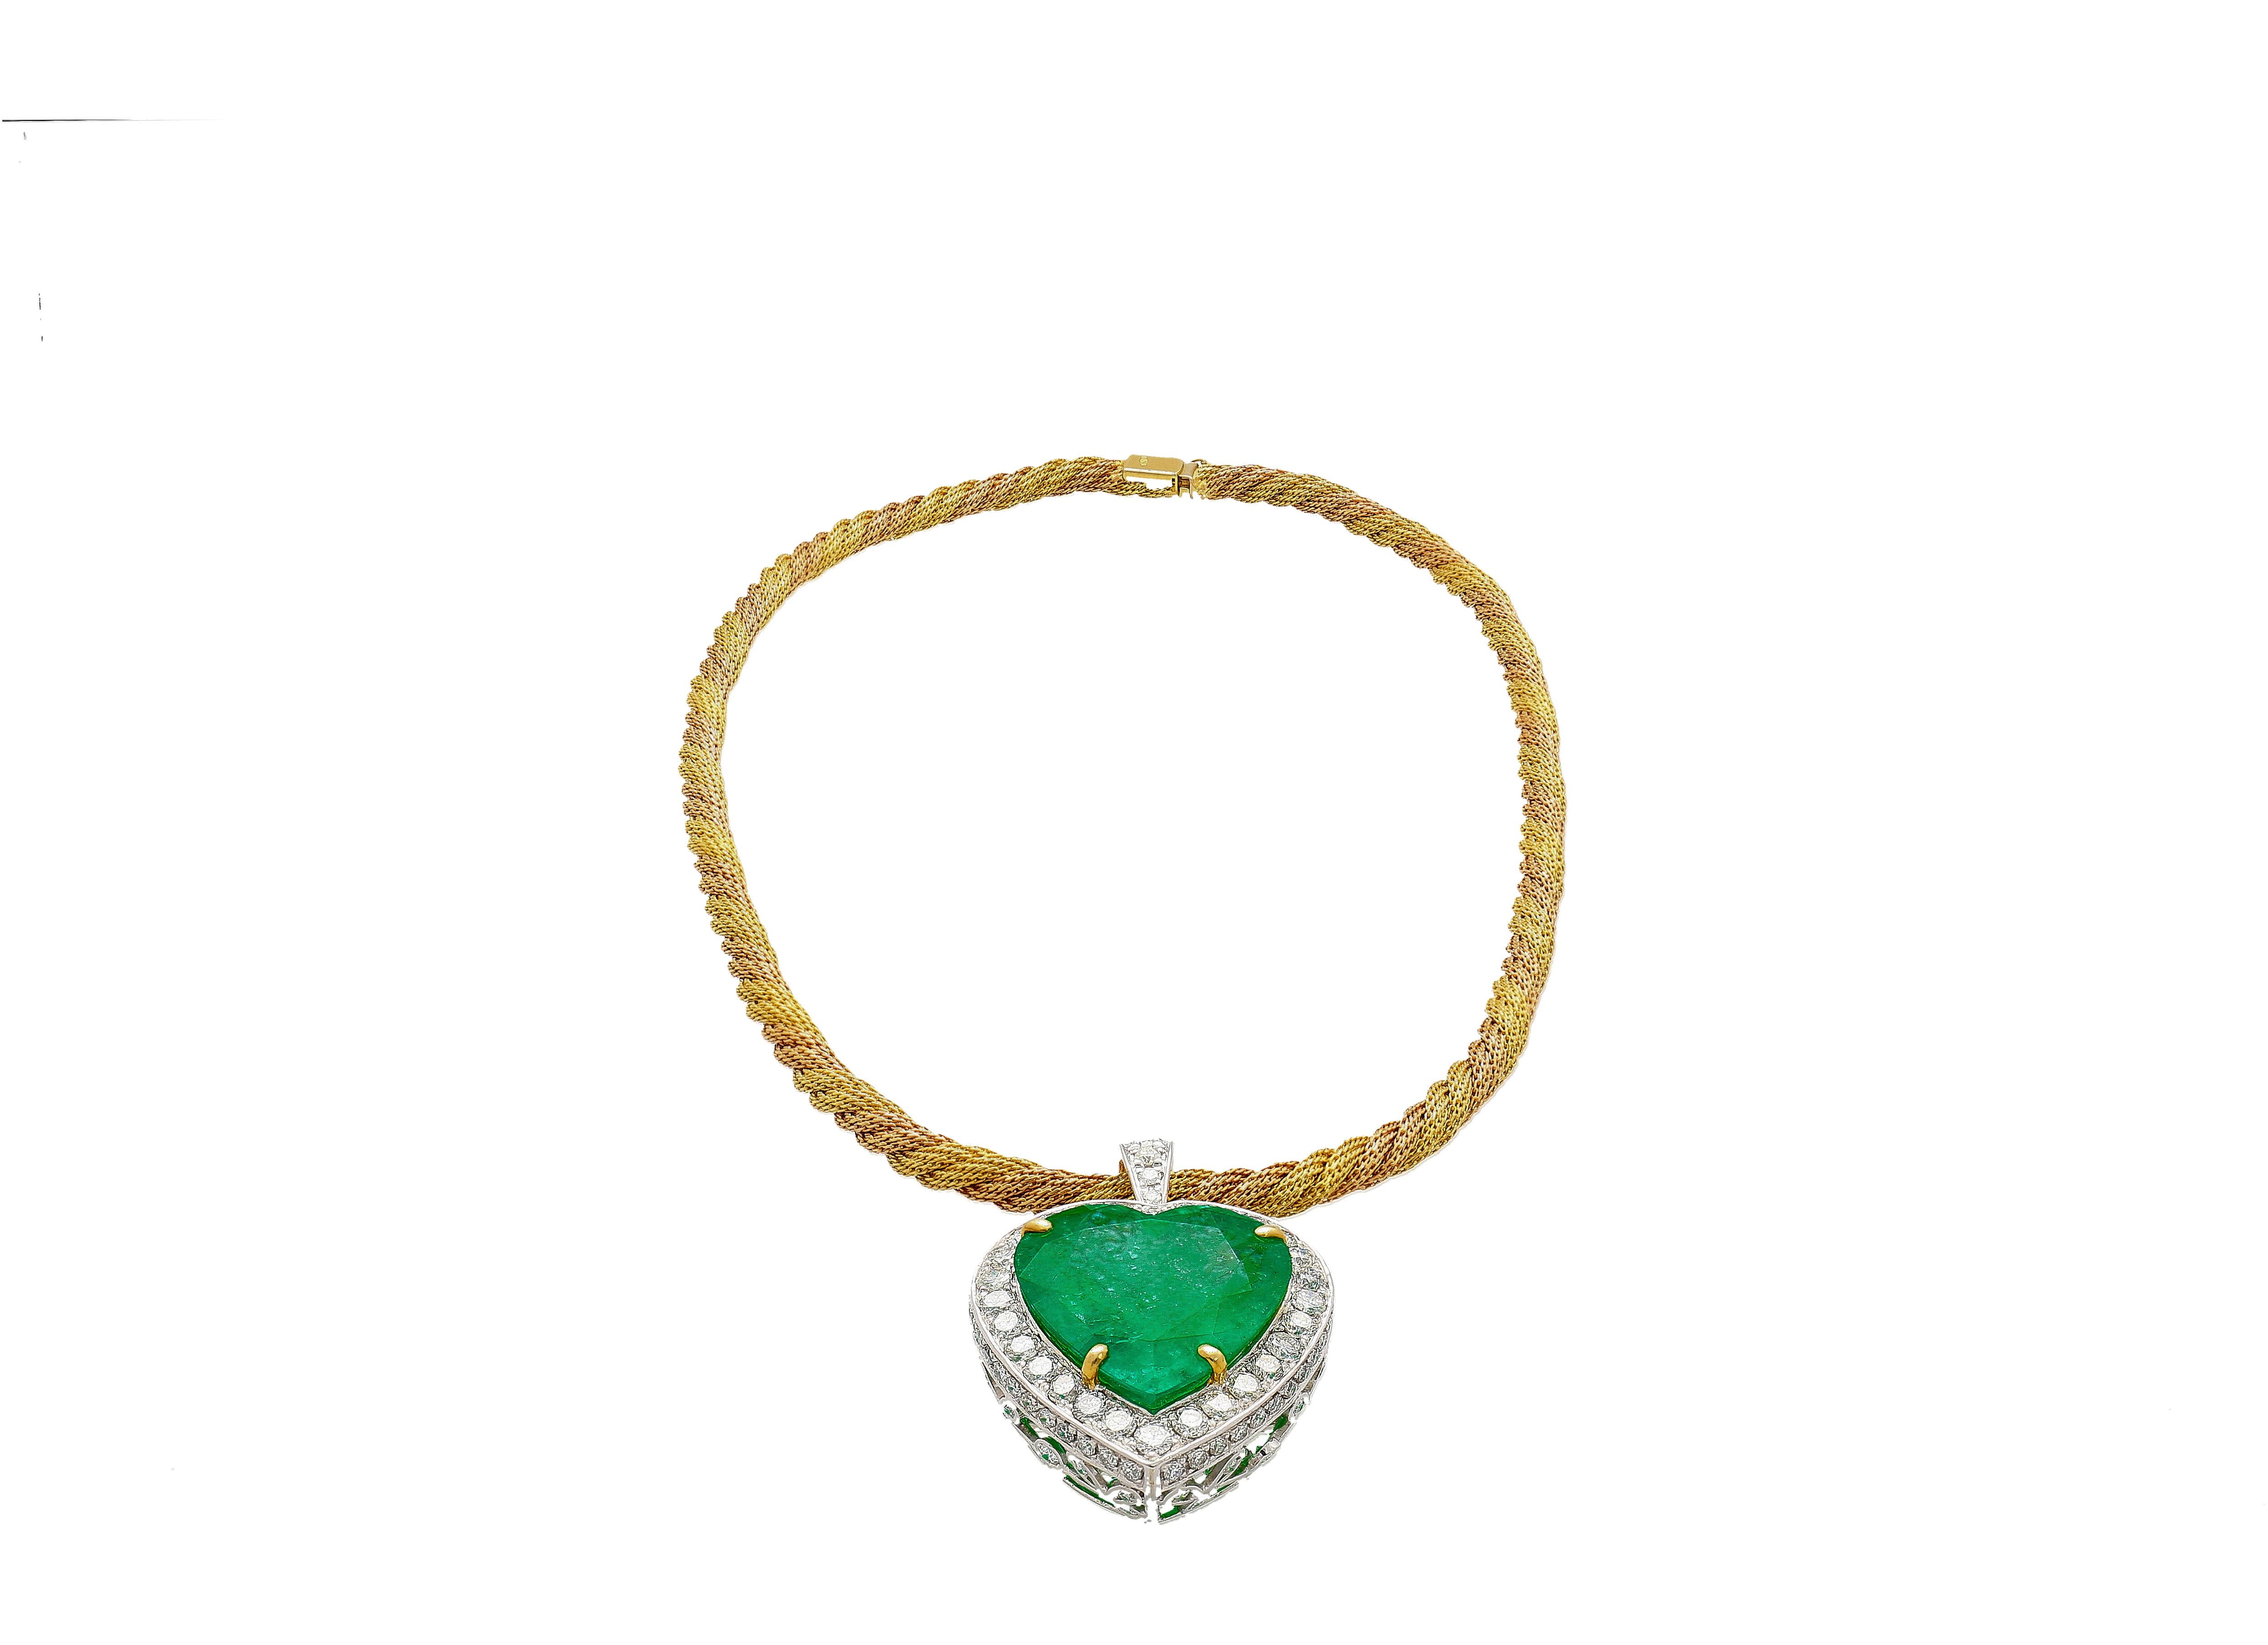 44 Carat Heart Shaped Green Emerald Pendant with Diamond Side Stone in 18K Gold  In New Condition For Sale In Miami, FL